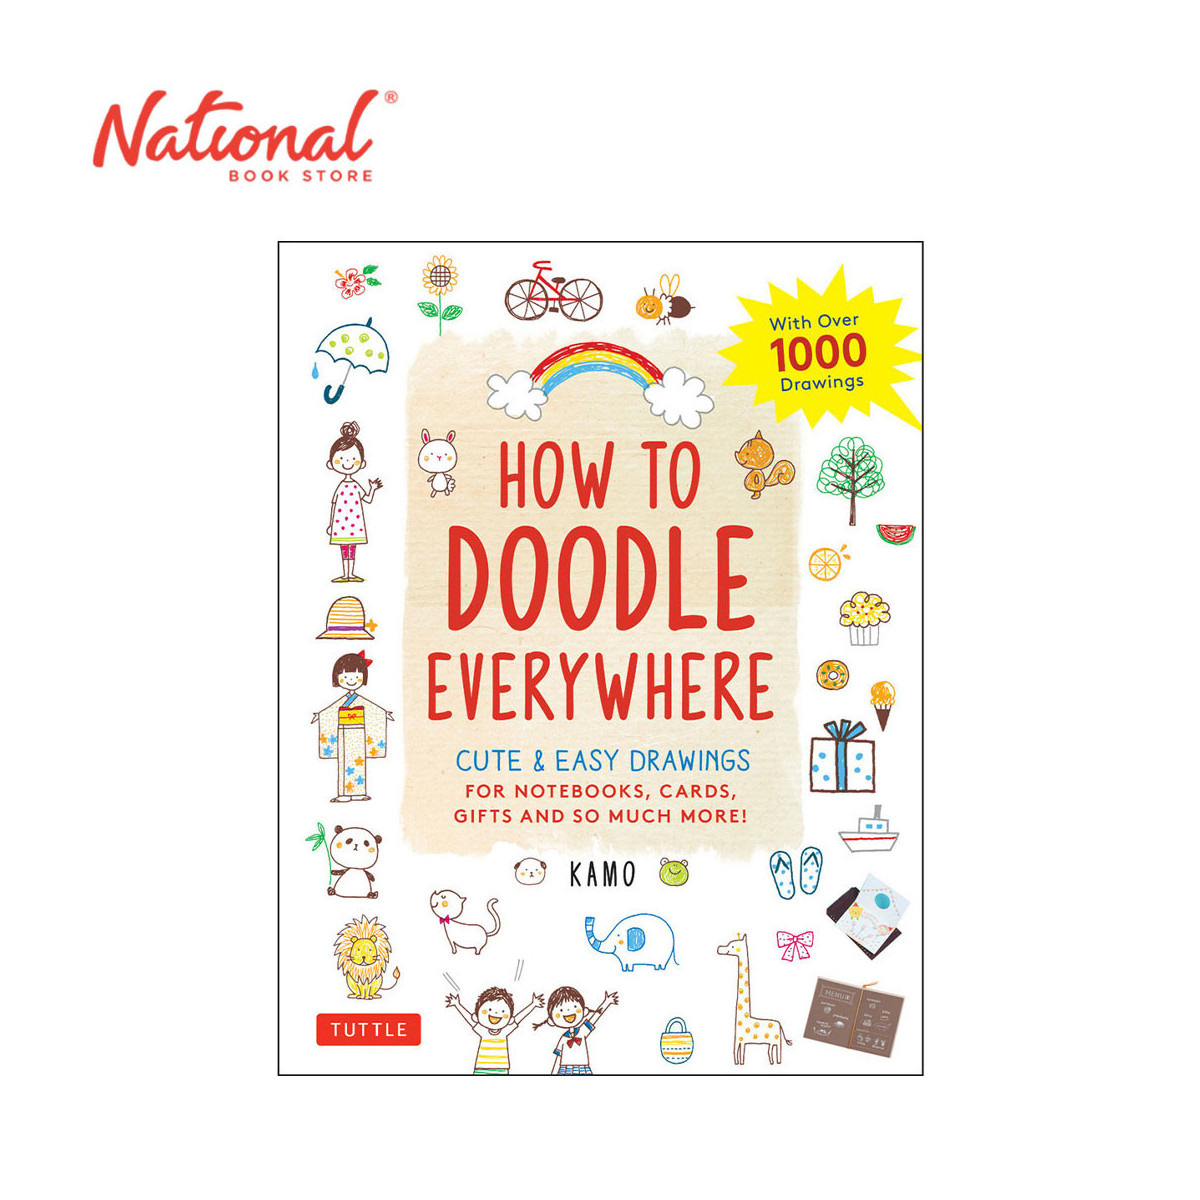 How to Doodle Everywhere by Kamo - Trade Paperback - Art Books